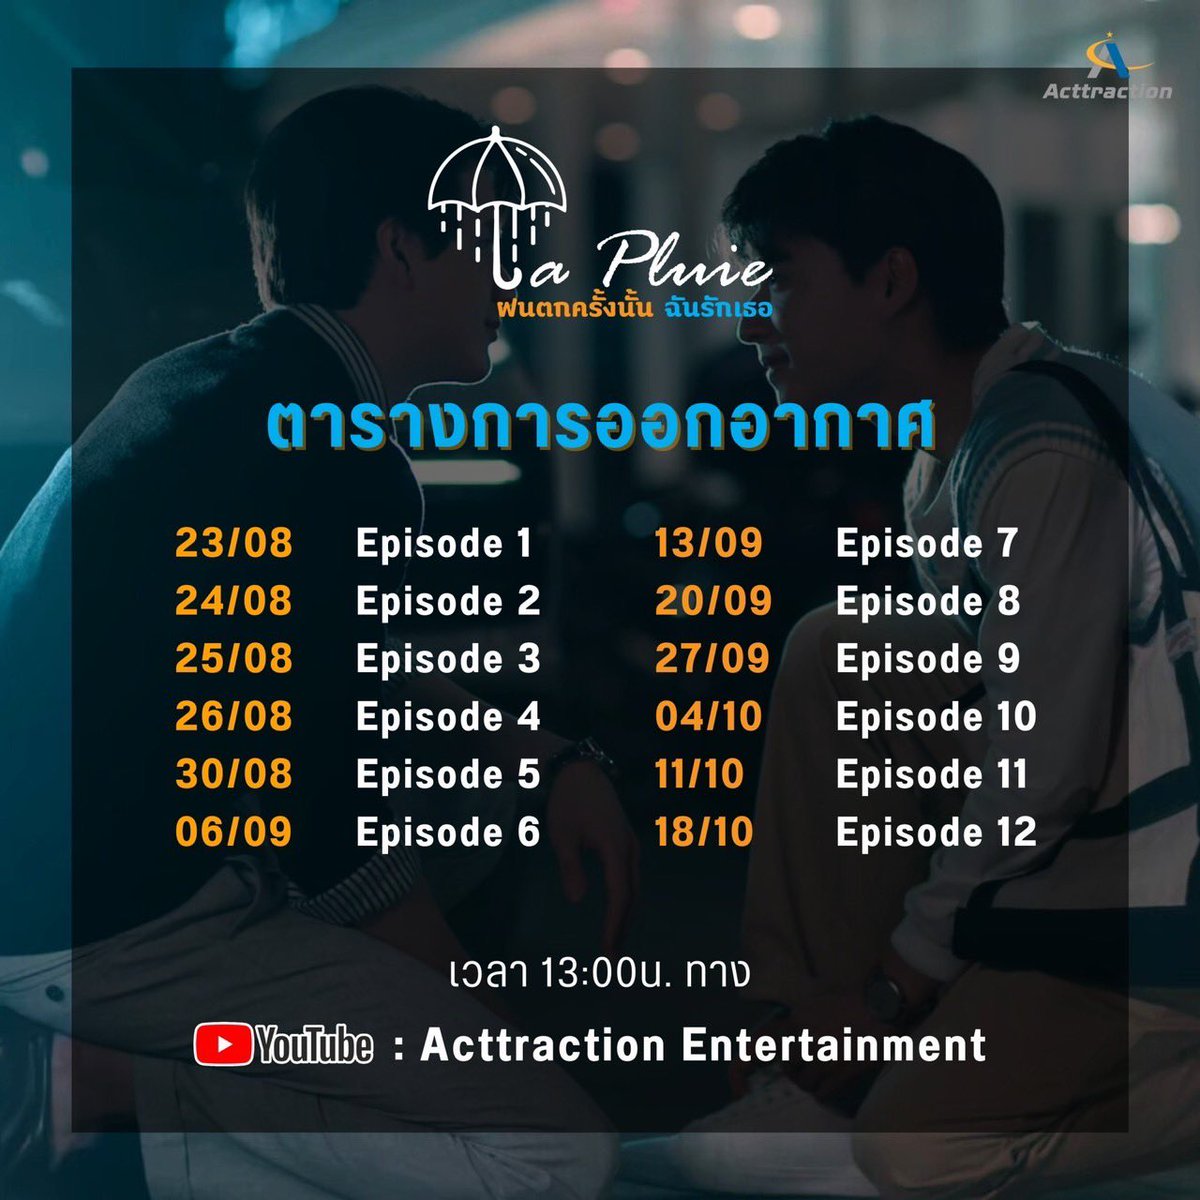 For those of you that weren't able to watch 'La Pluie The Series' it is now available to watch for free on 'Acctraction Entertainment's' official YouTube Channel. See the airing schedule below: 

#ฝนตกครั้งนั้นฉันรักเธอ #LaPluieTheSeries